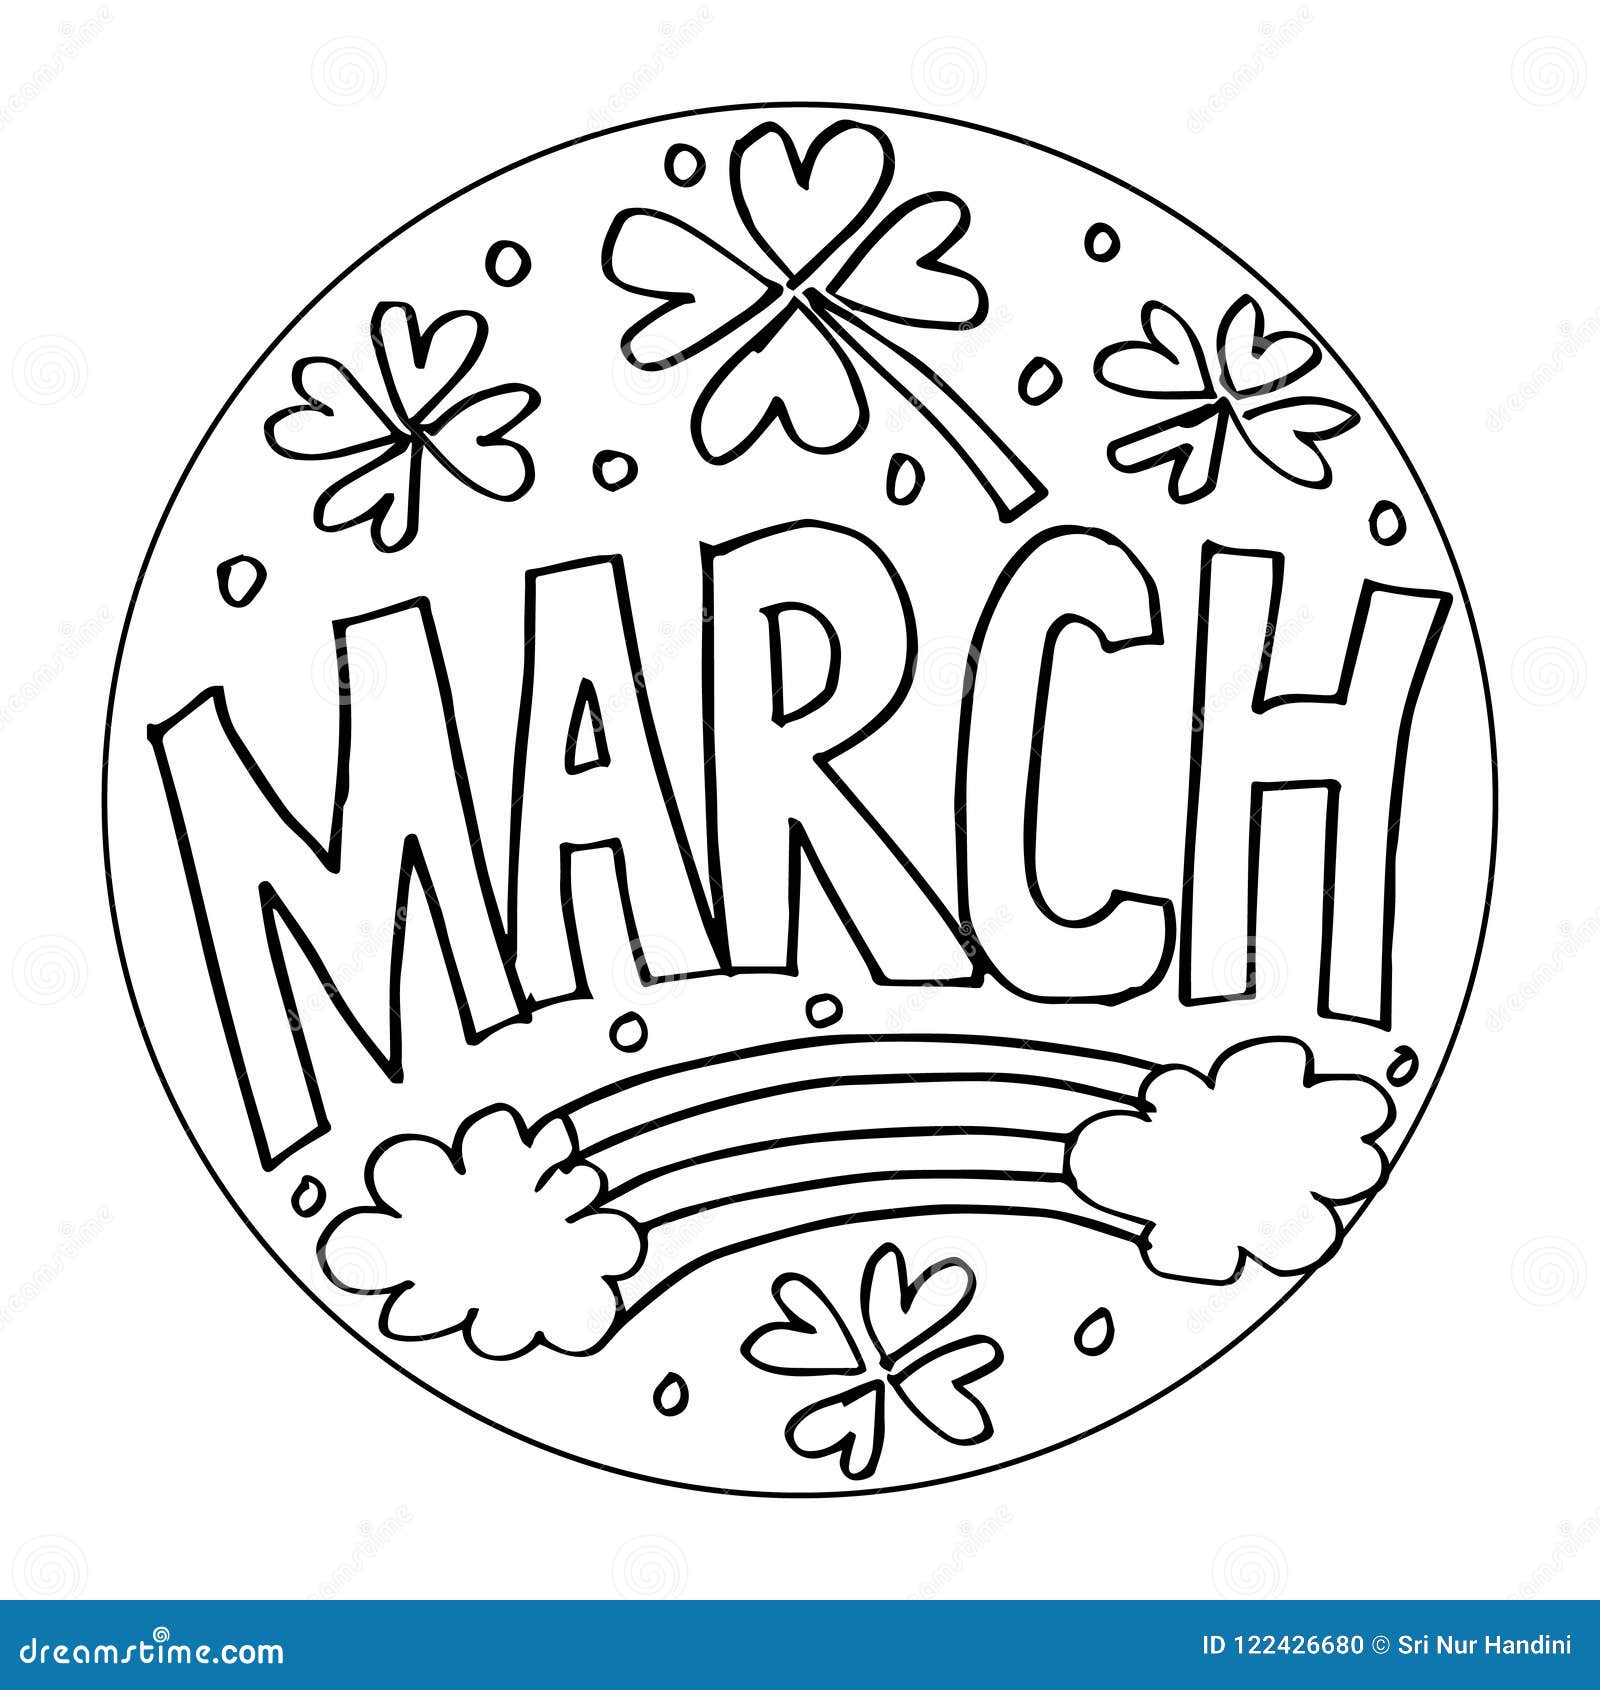 March Coloring Pages for Kids Stock Vector - Illustration of children